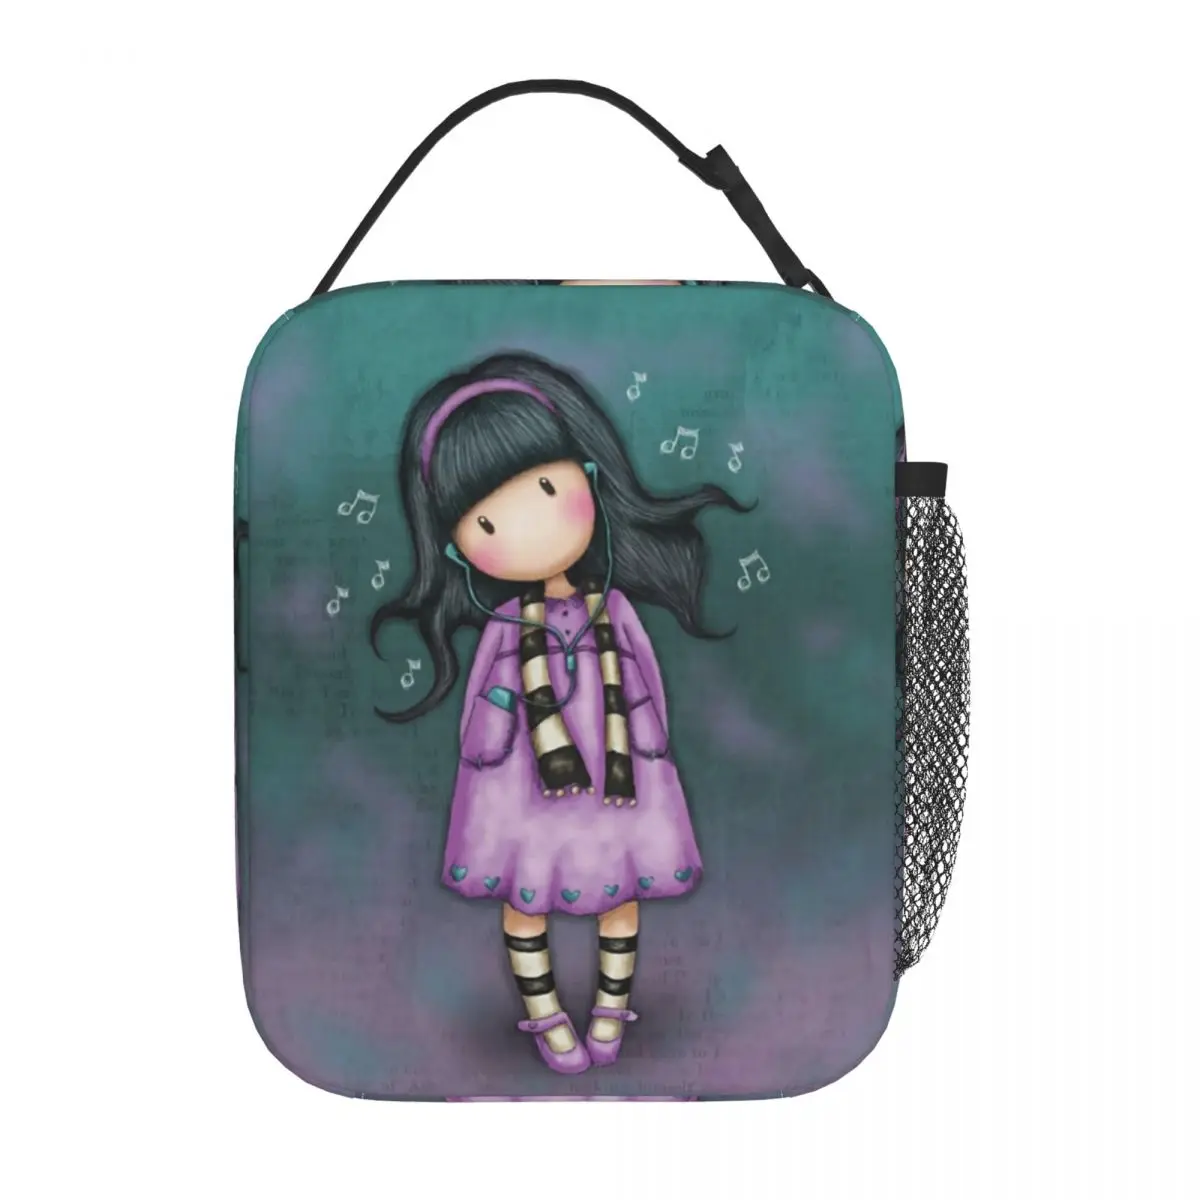 

Santoro Gorjuss Doll Thermal Insulated Lunch Bags School Little Song Portable Lunch Container Thermal Cooler Food Box